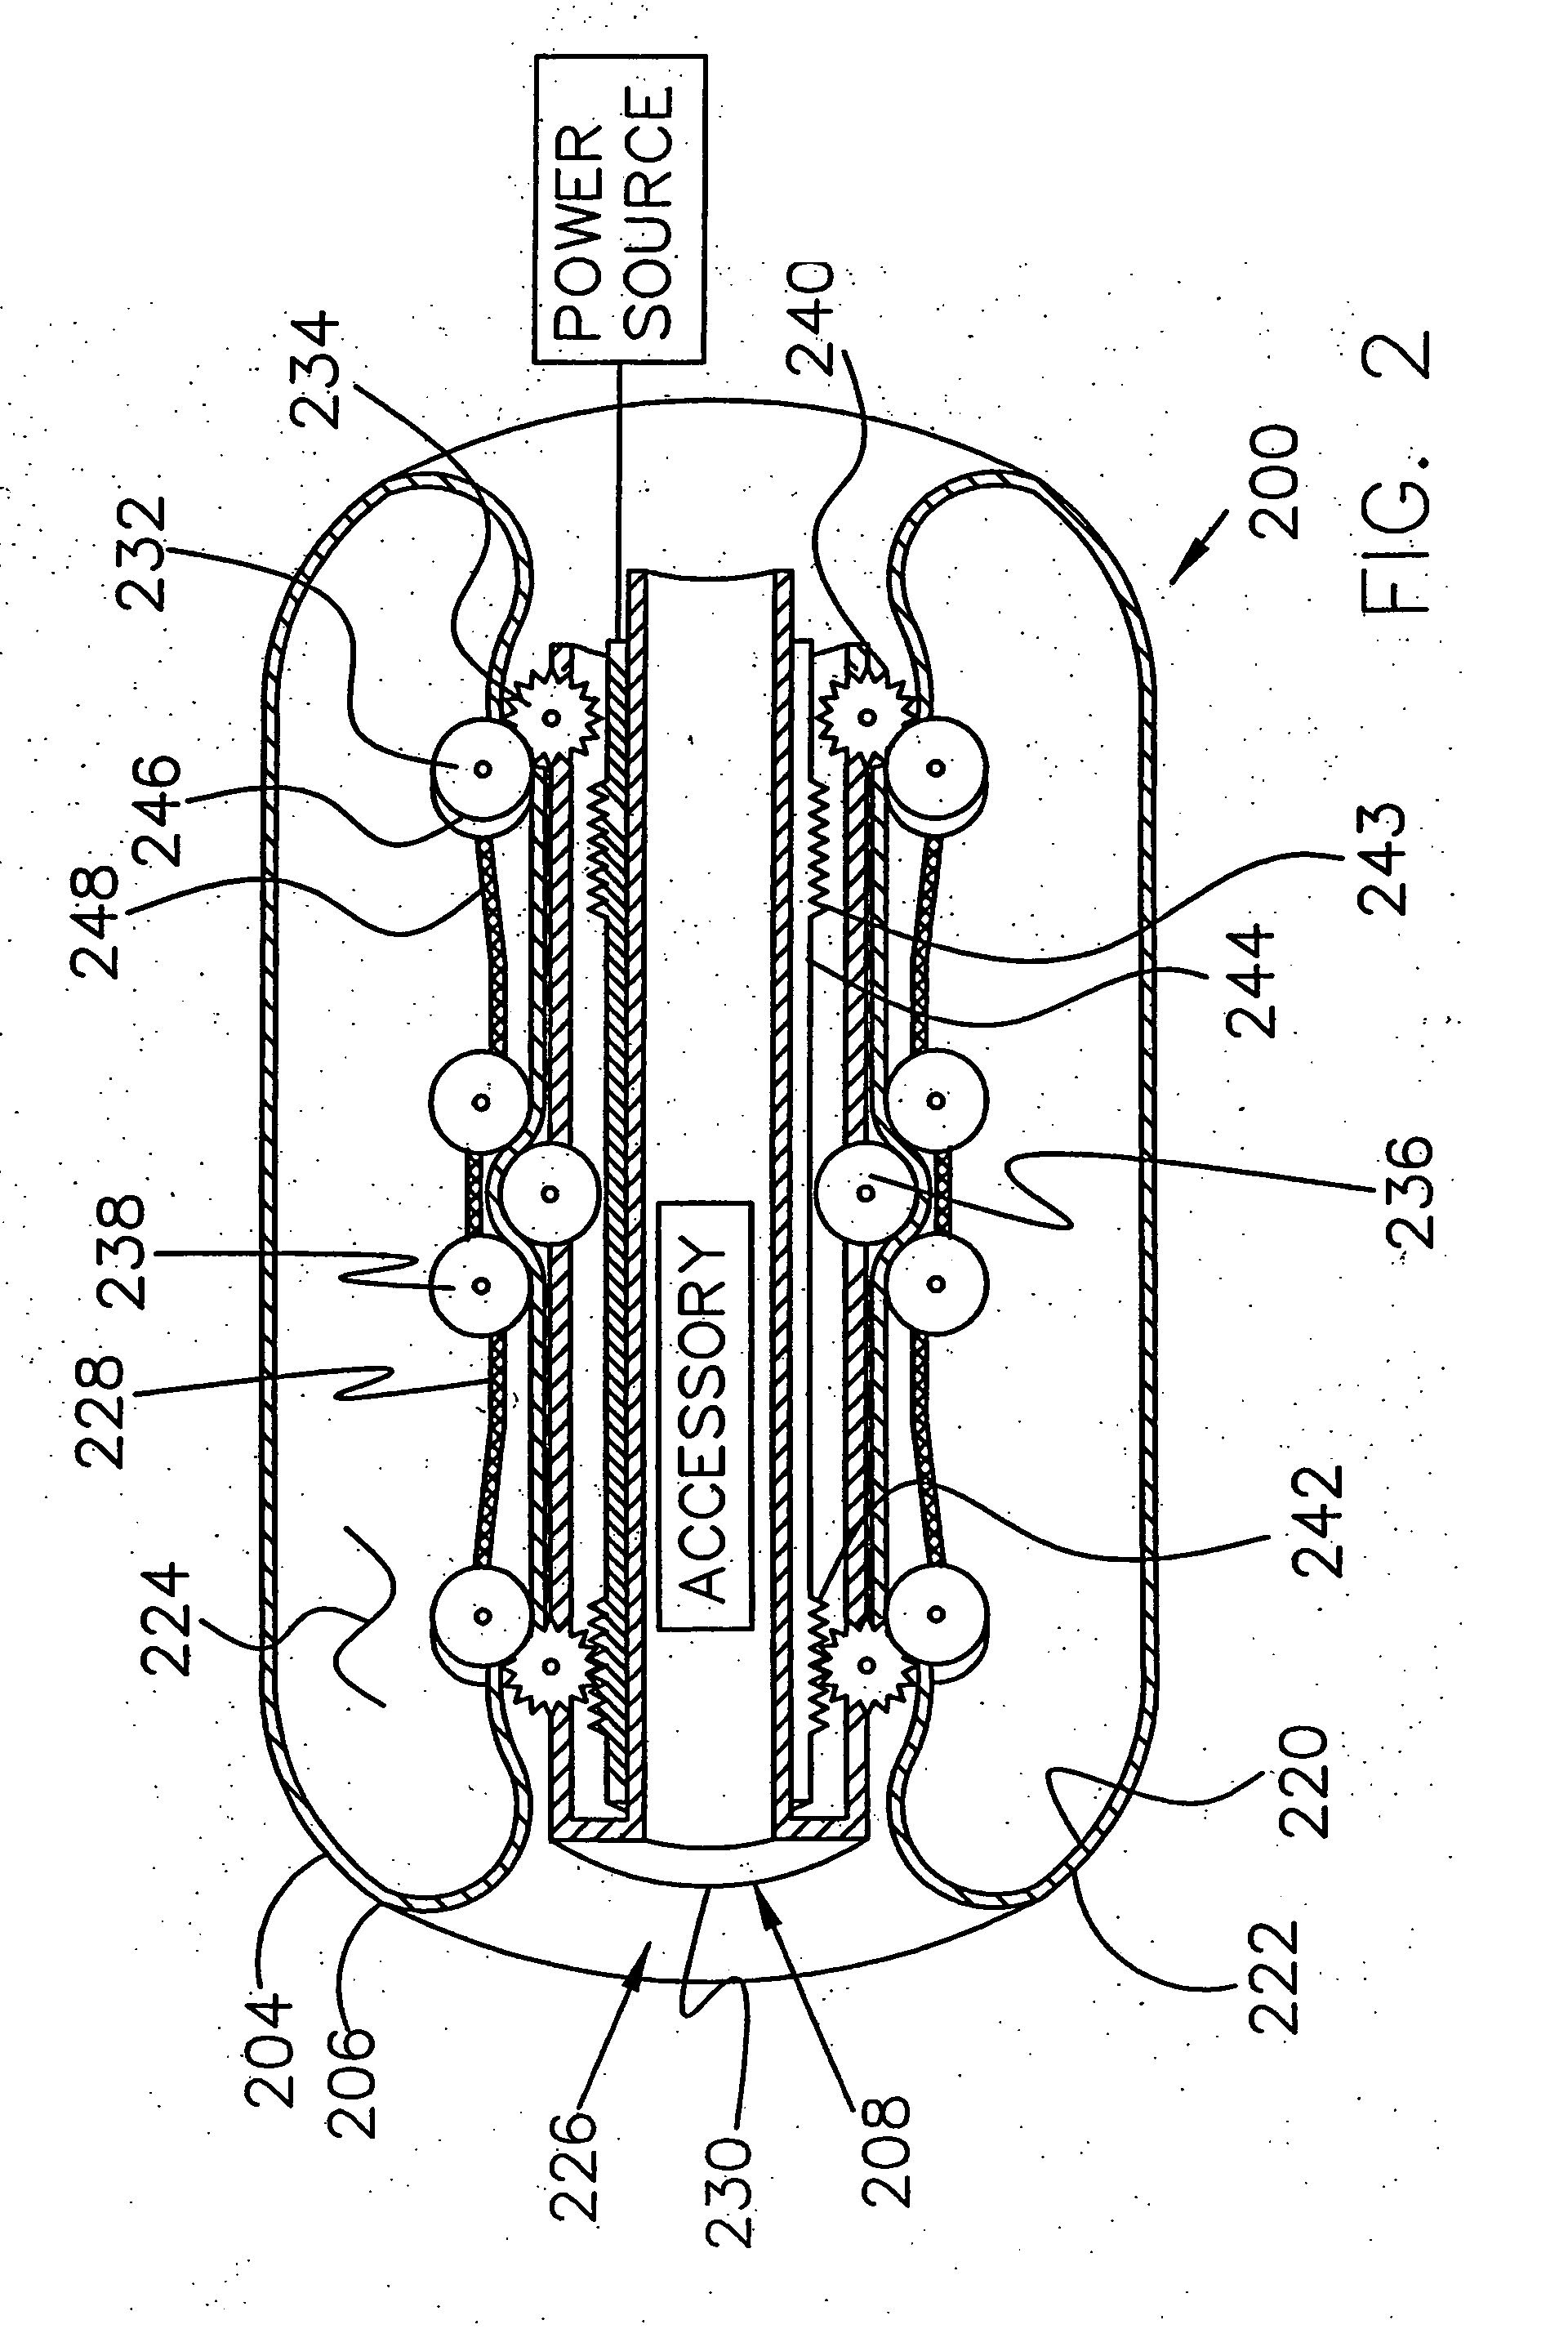 Self-propellable endoscopic apparatus and method